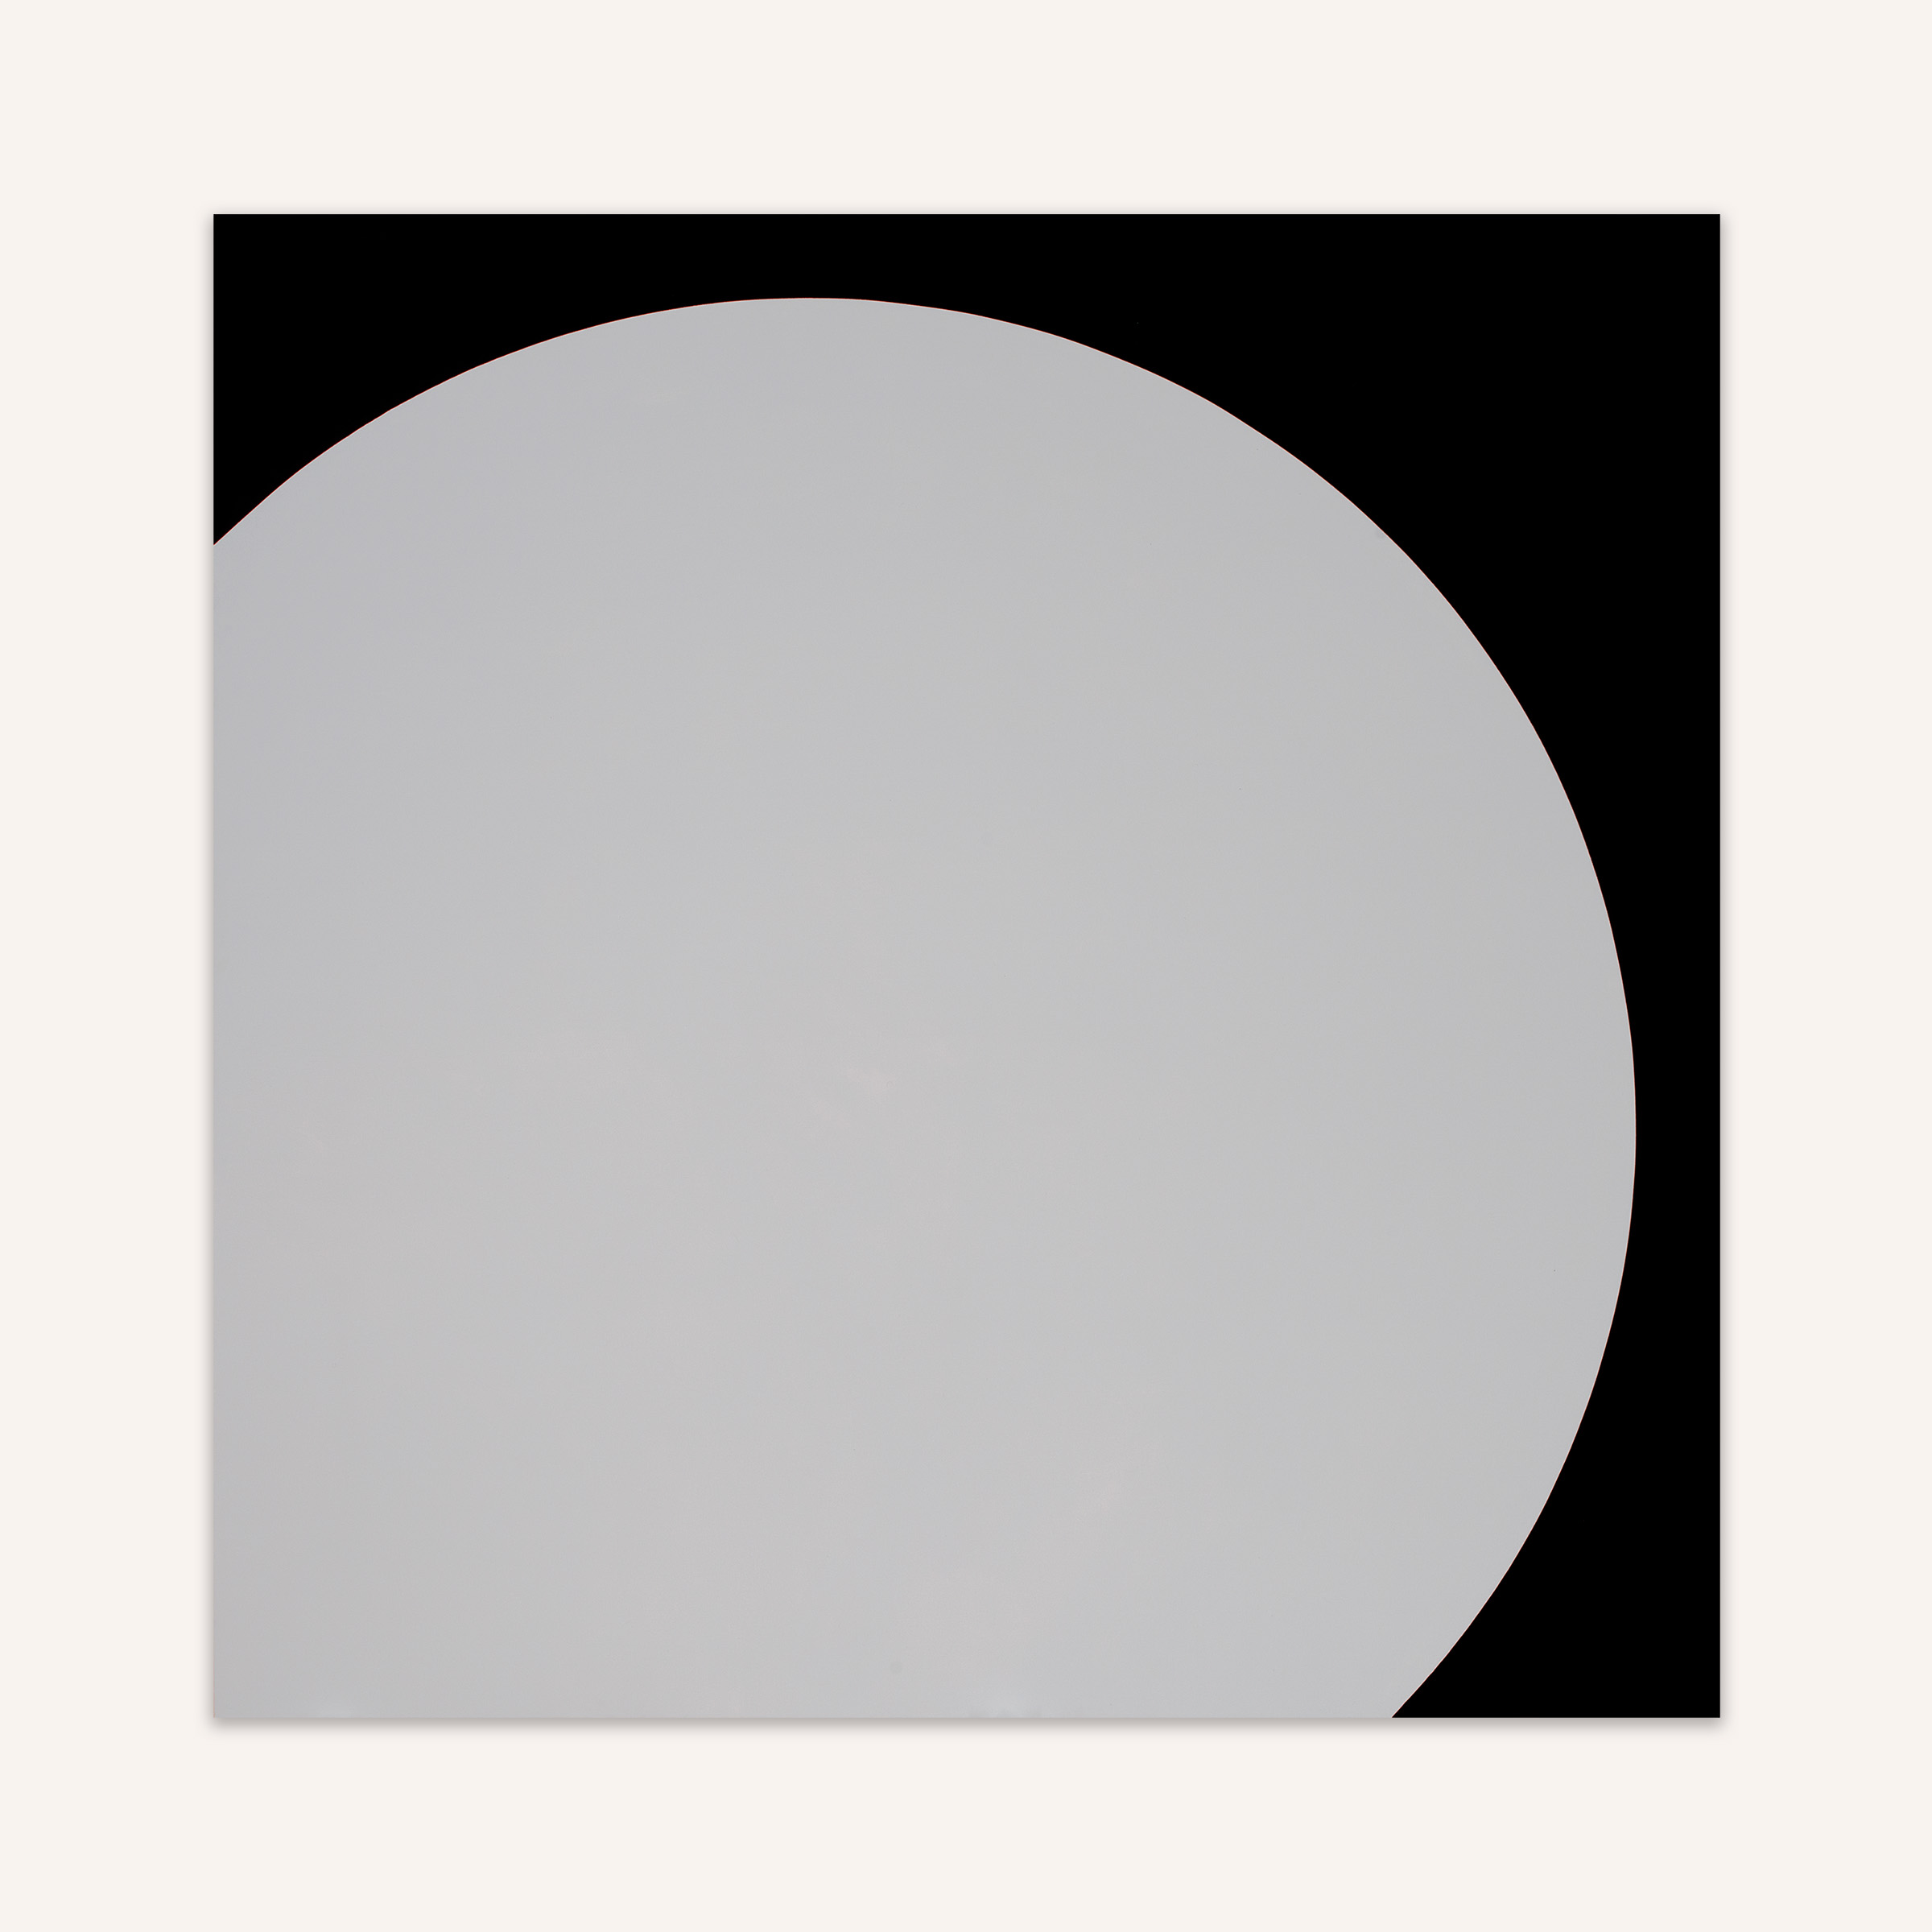 The painting Prairie Moon by Leon Polk Smith is a square canvas with a large light grey circle so large that it overlaps the canvas on the bottom left, exposing a round edge in black running from top left to bottom right.